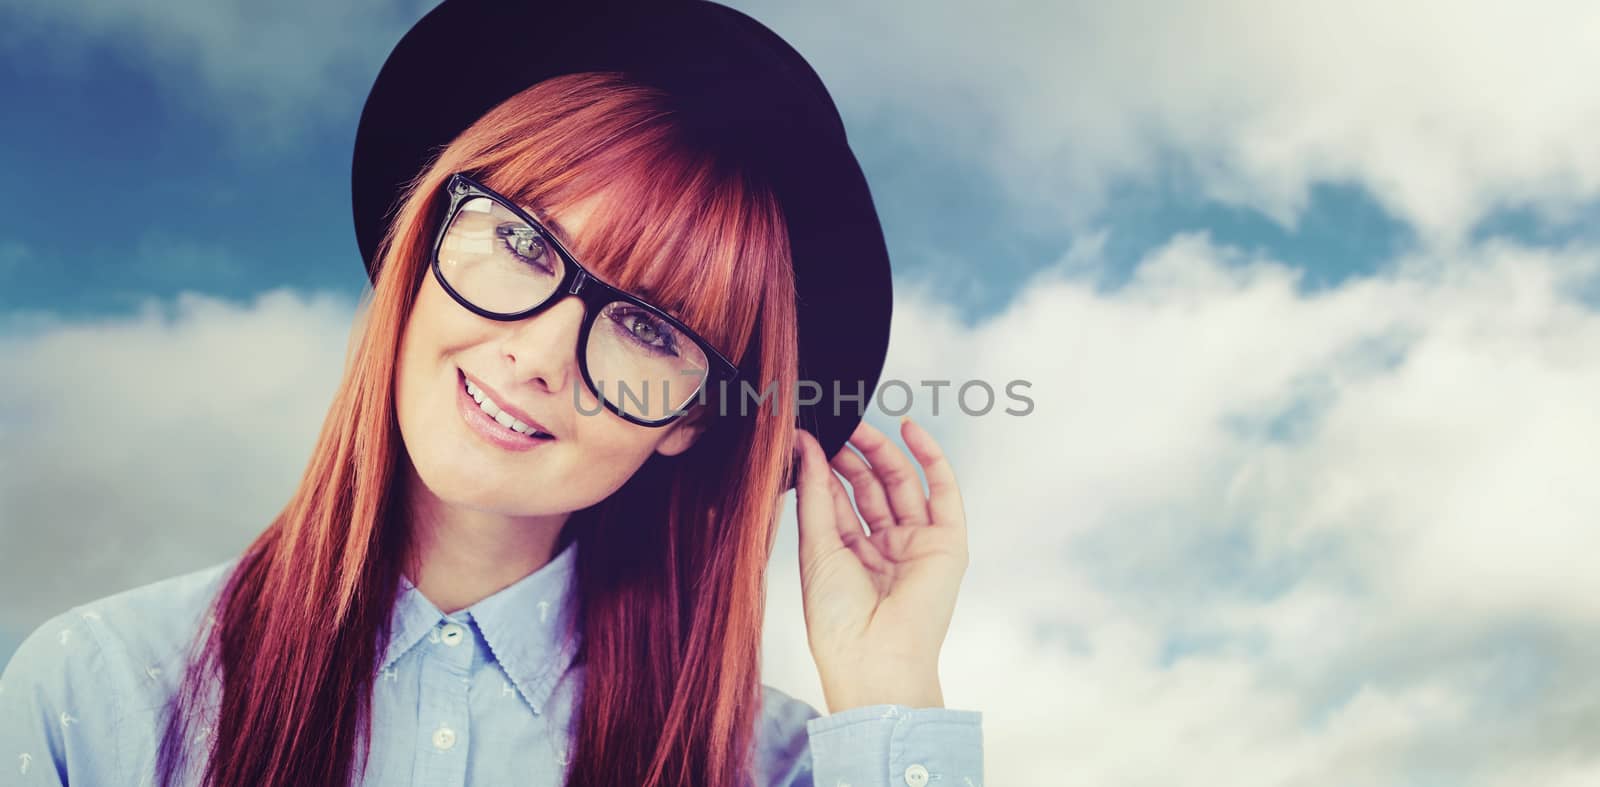 Smiling hipster woman posing face to the camera against blue sky with clouds